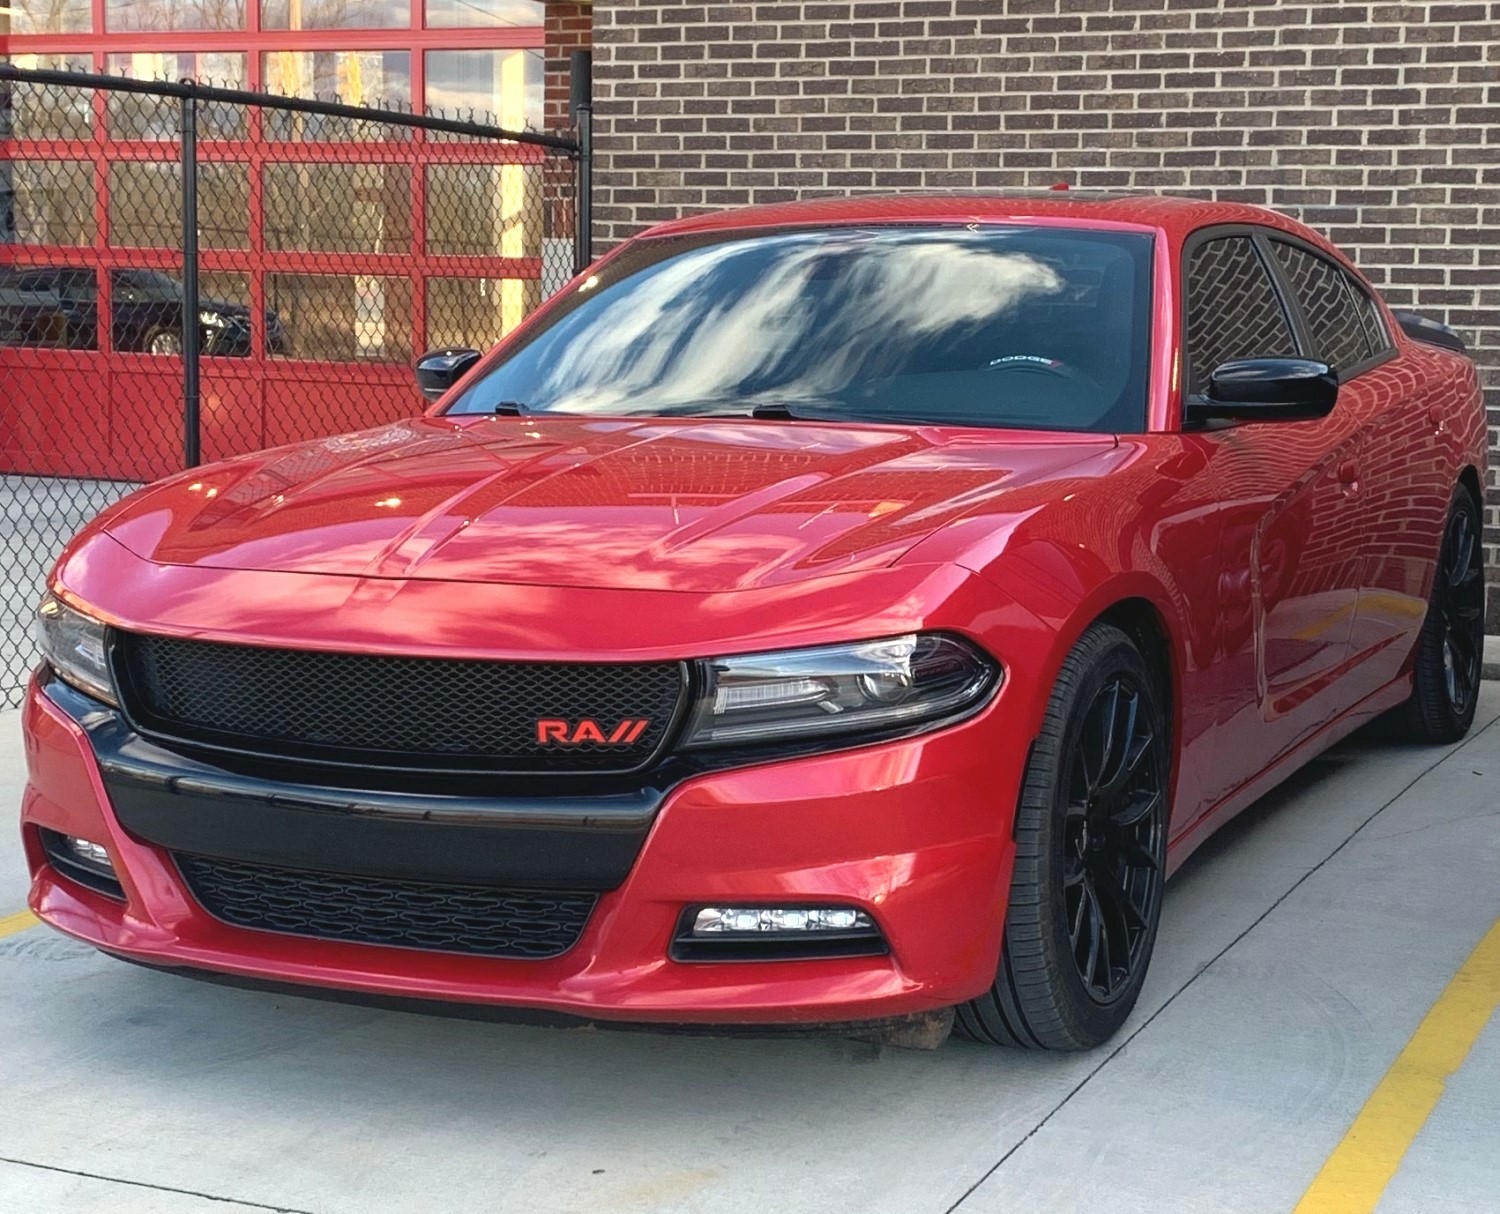 Get a Bold New Look: Custom Grilles and Emblems for Your Dodge Charger